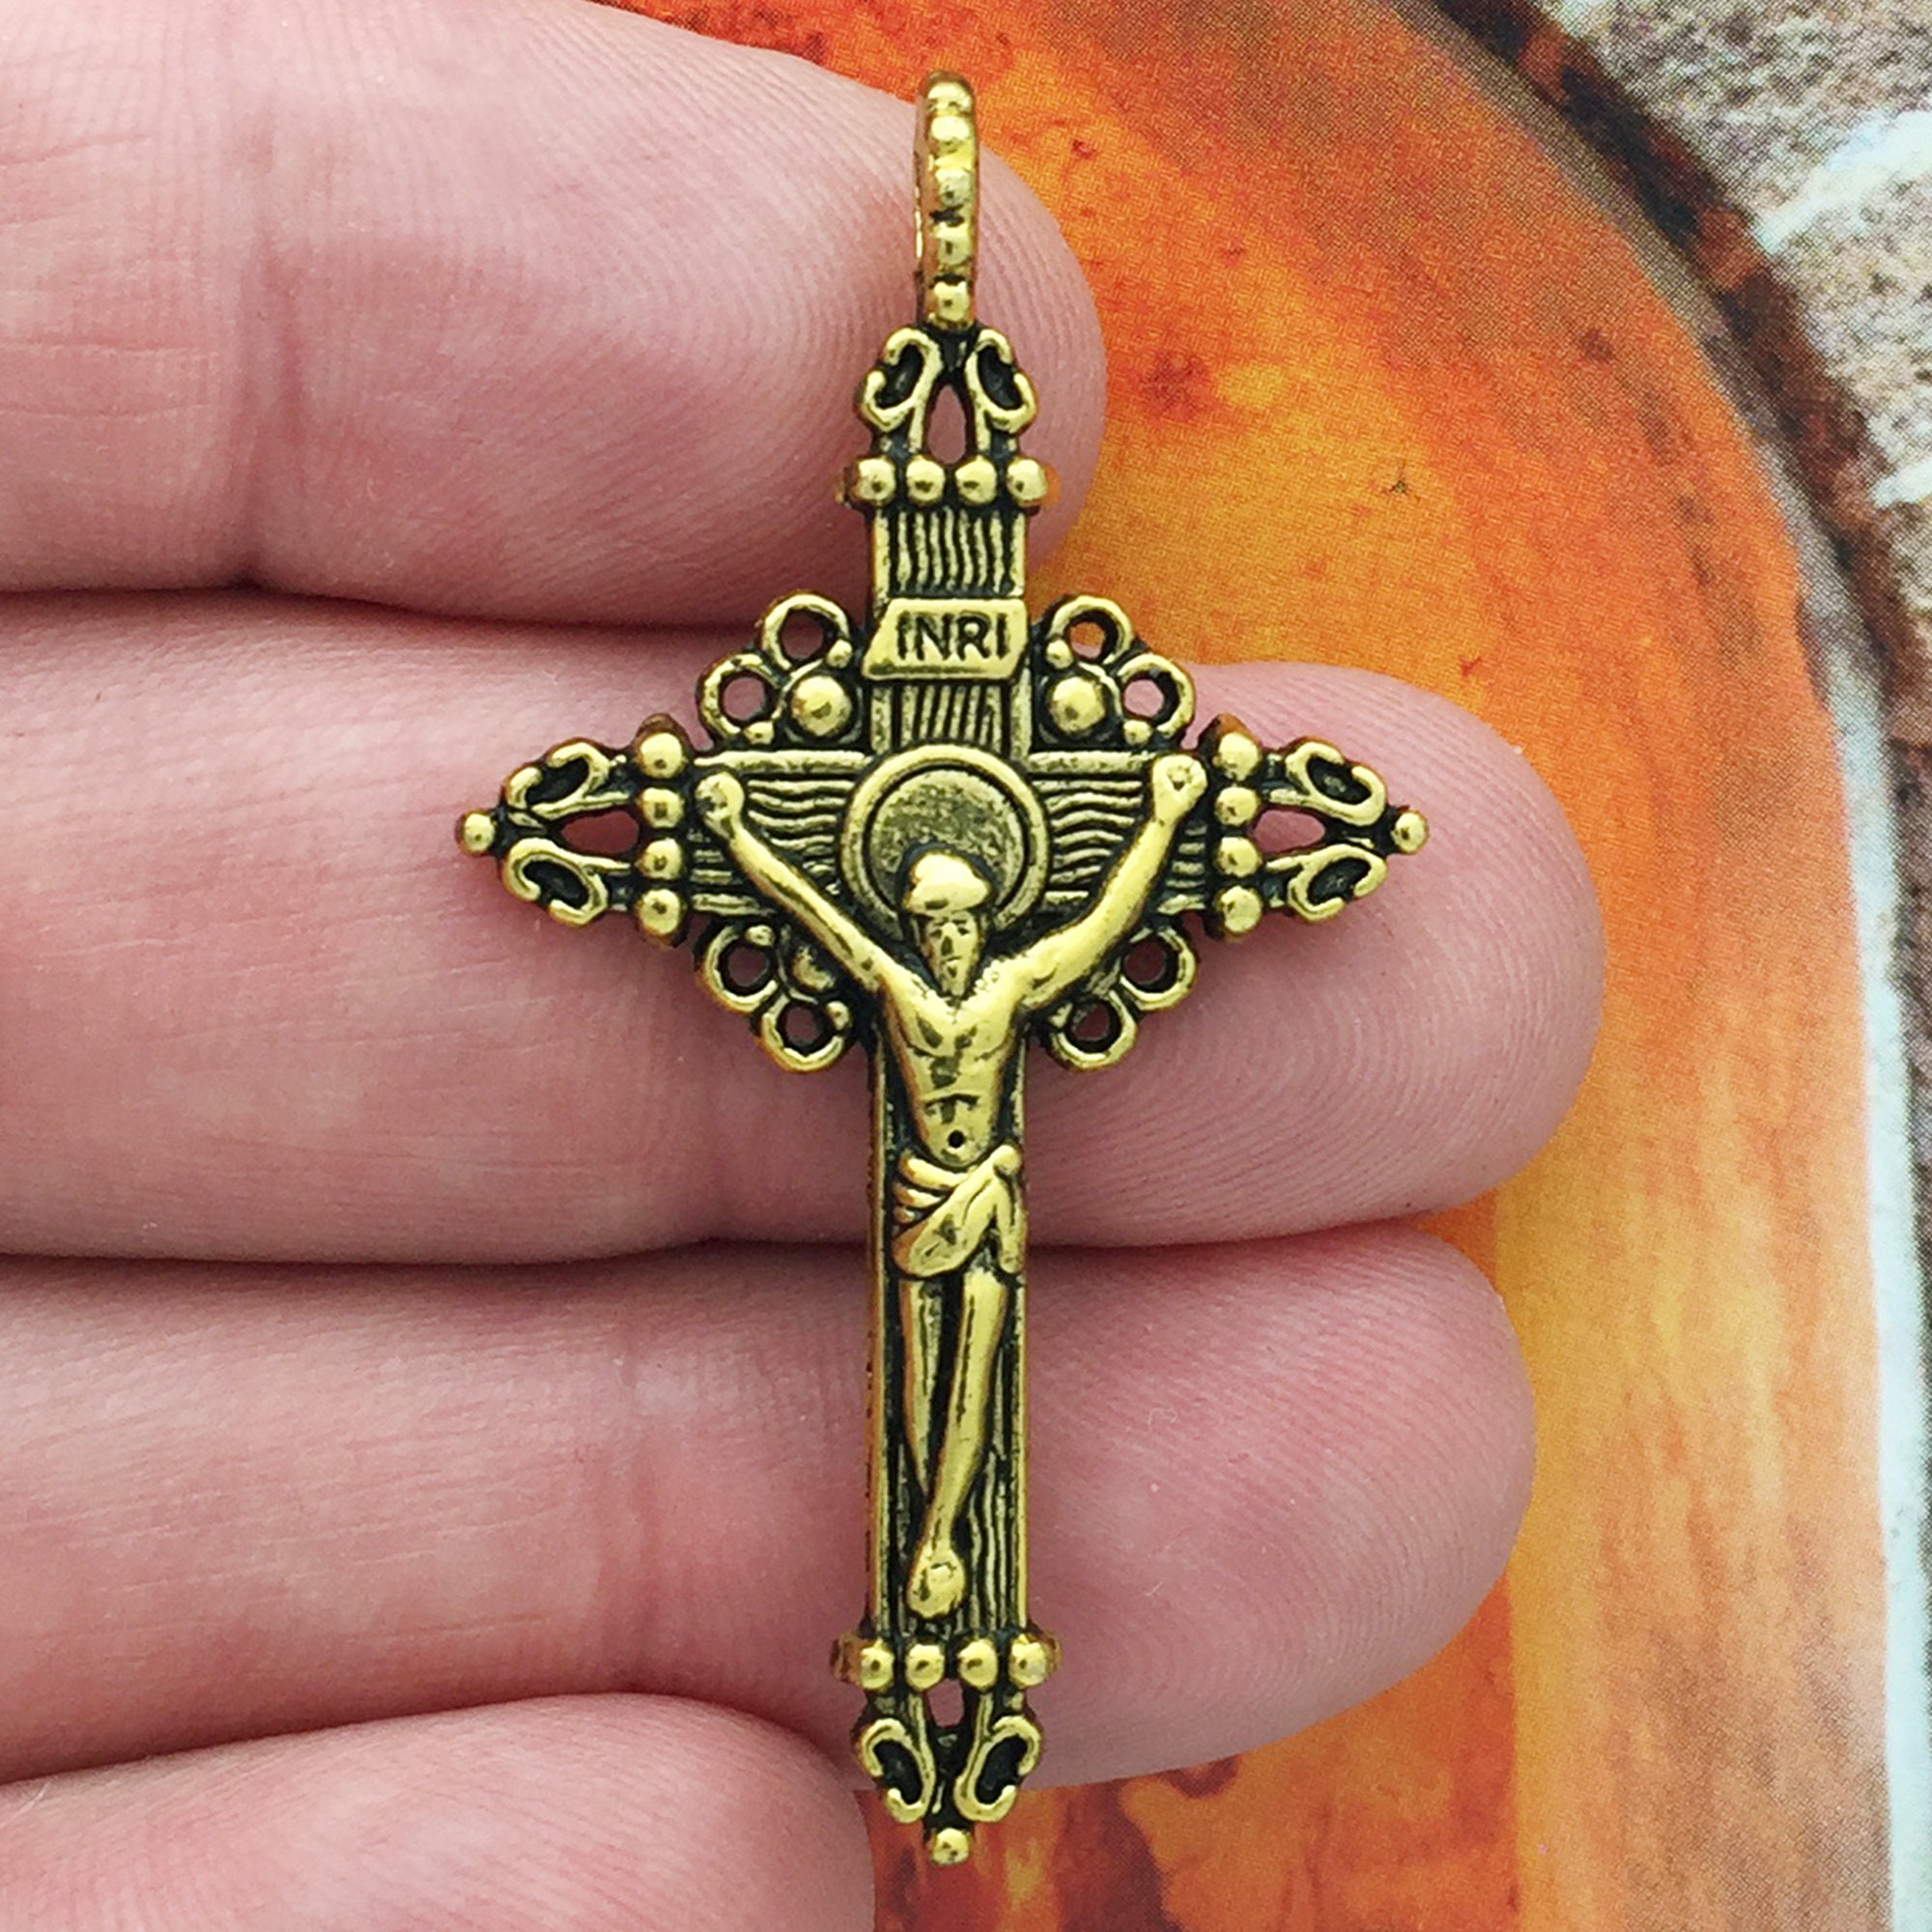 6 Copper Crucifix Cross Charm Rosary Parts by TIJC SP1135 